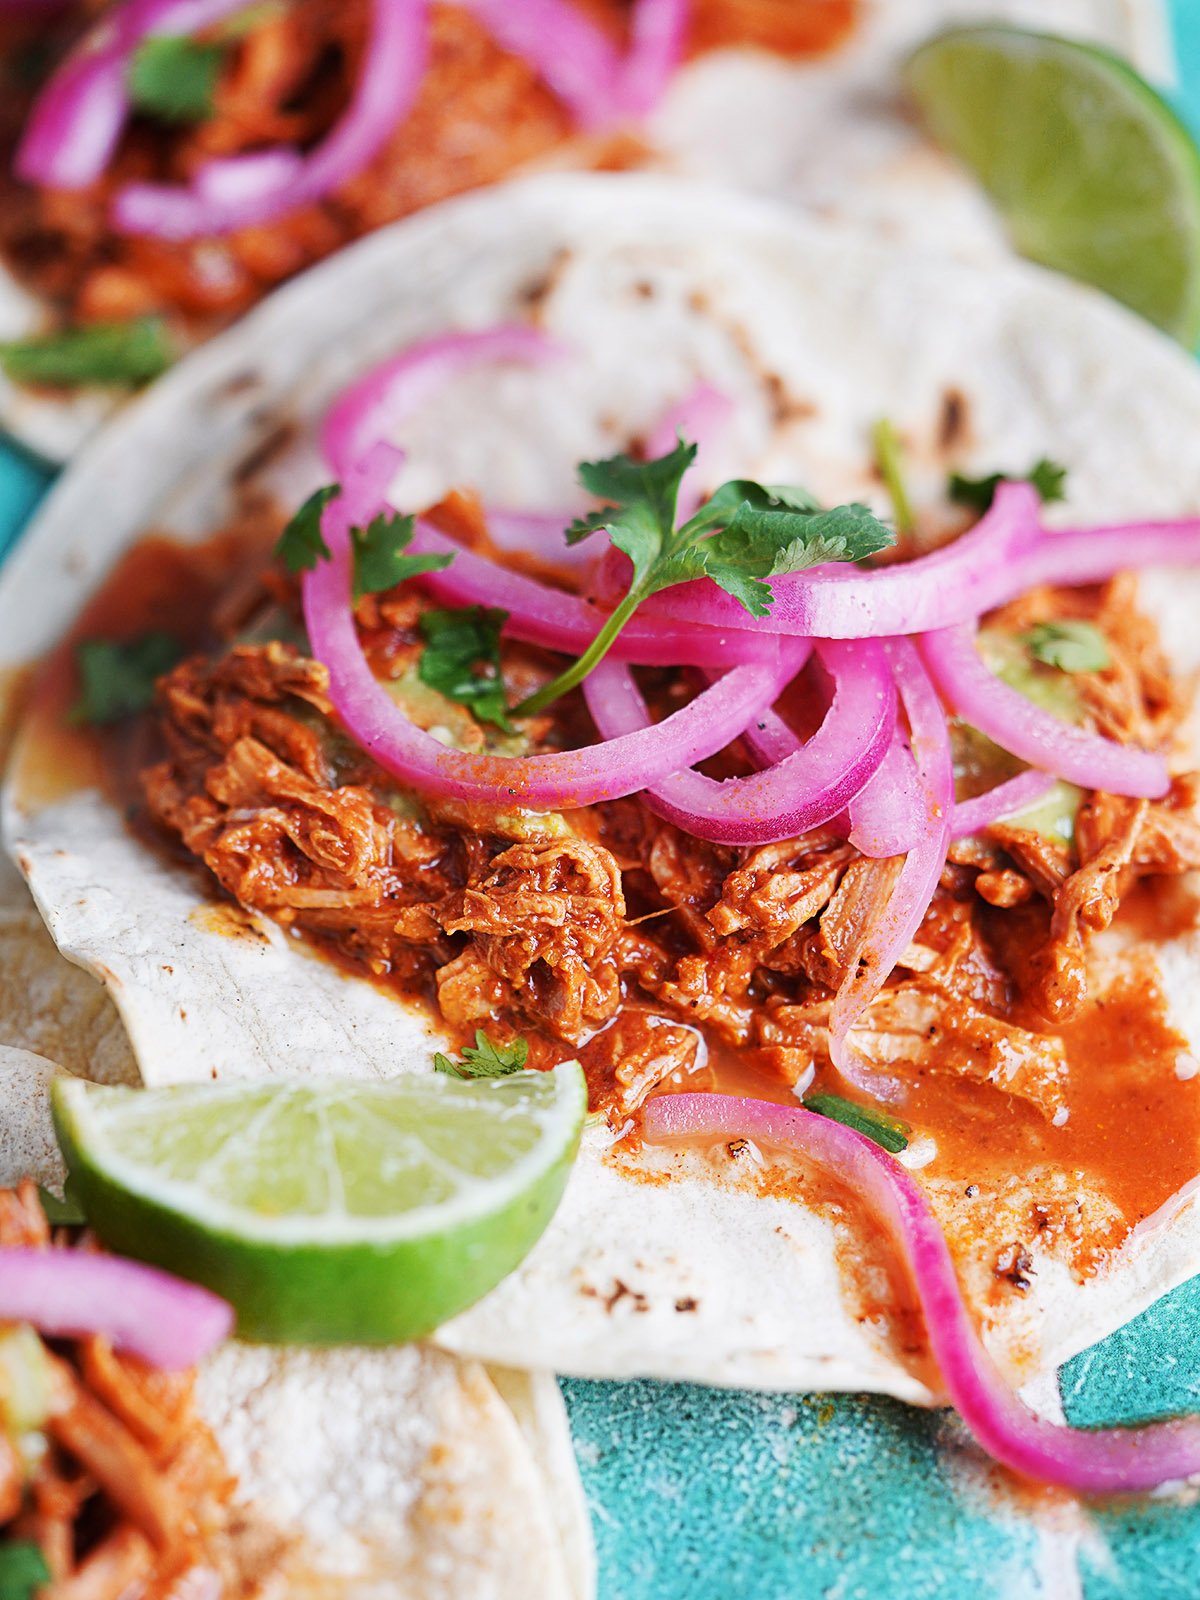 A taco made with cochinita pibil topped with red pickled onions